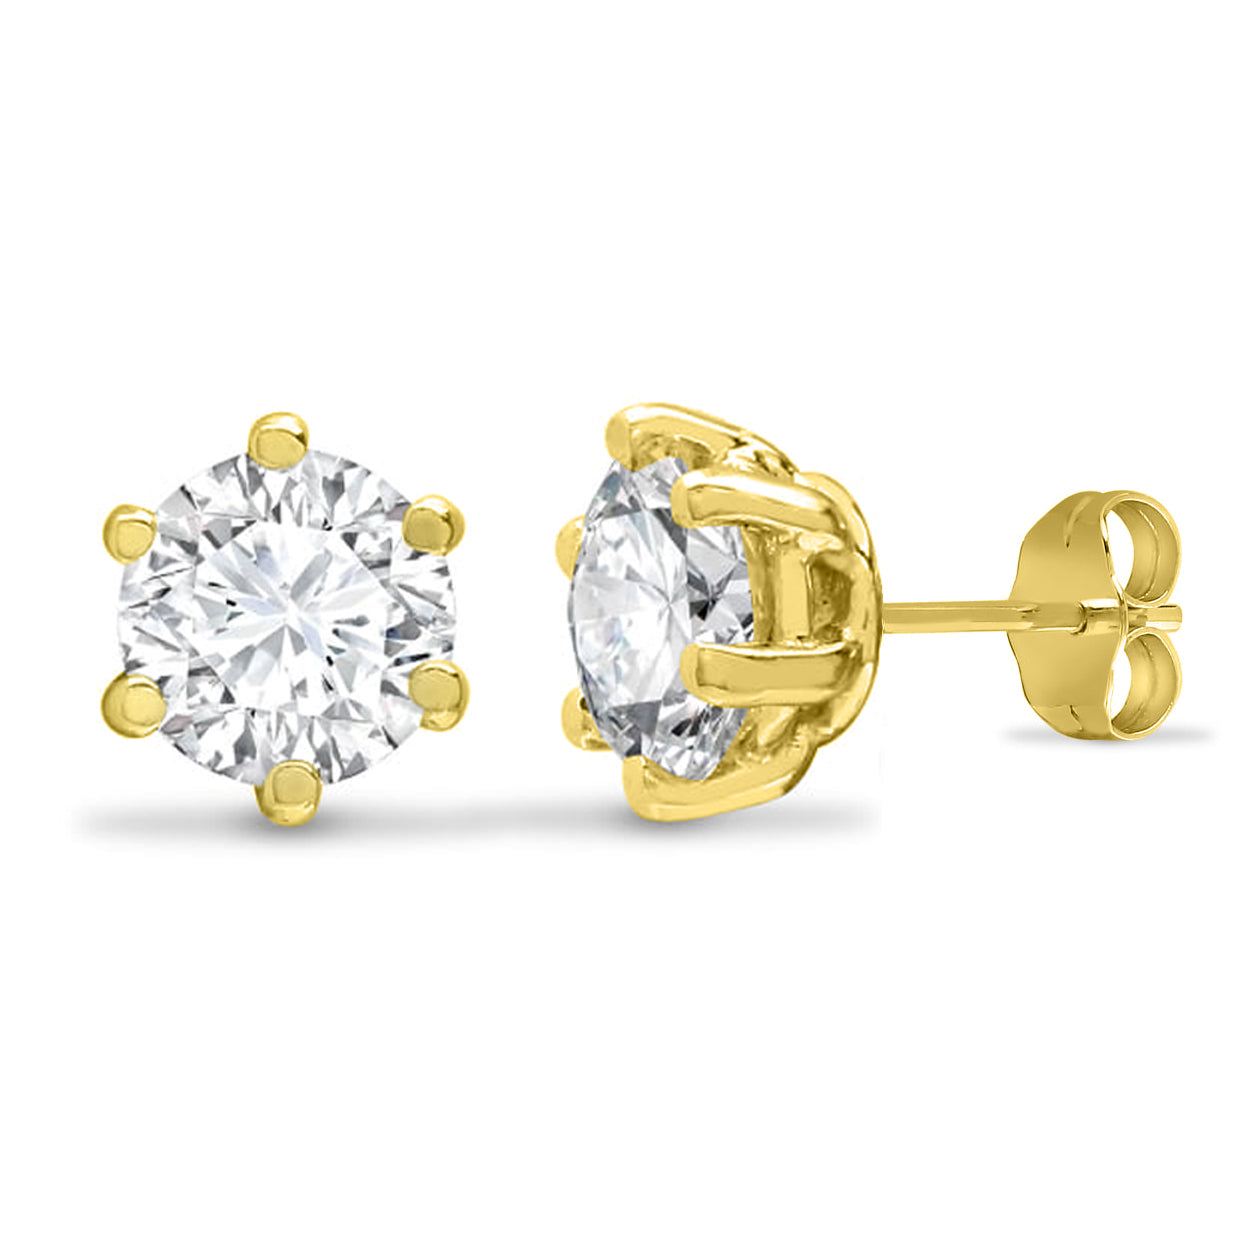 9ct Gold  CZ 6 Claw Solitaire Stud Earrings, 6mm - JES128